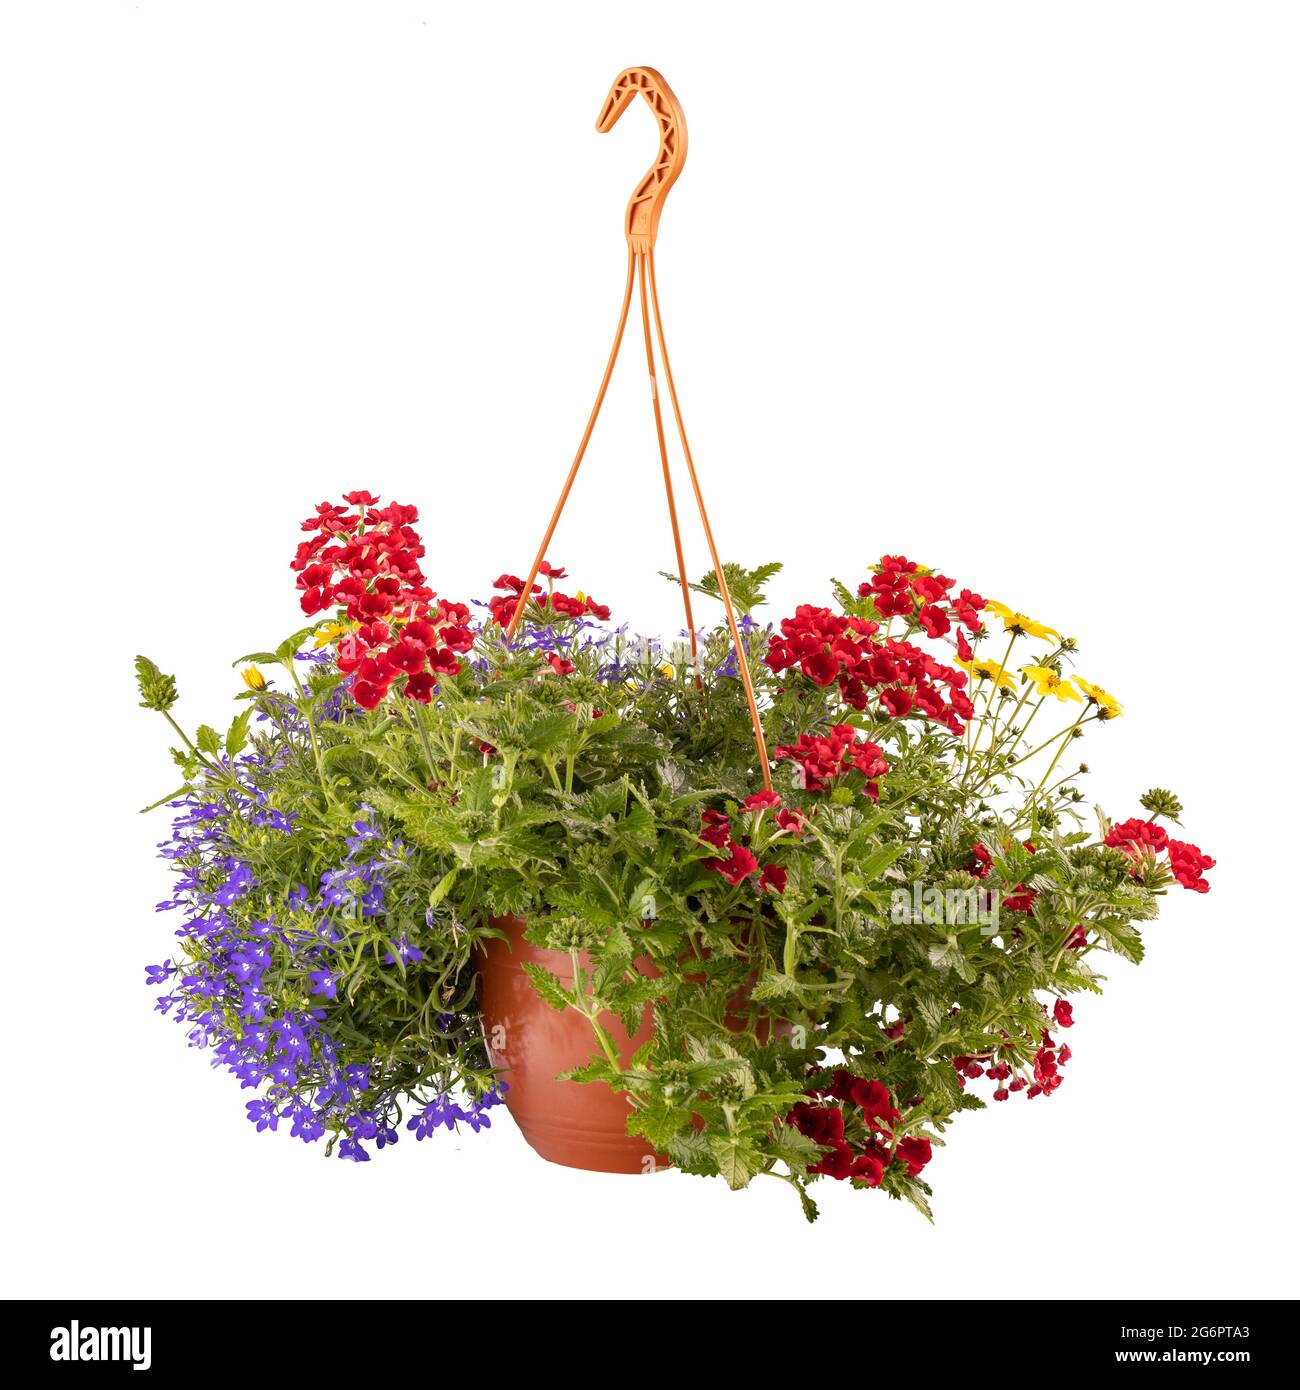 Hanging pot with colorful flowers isoolated on white background Stock Photo